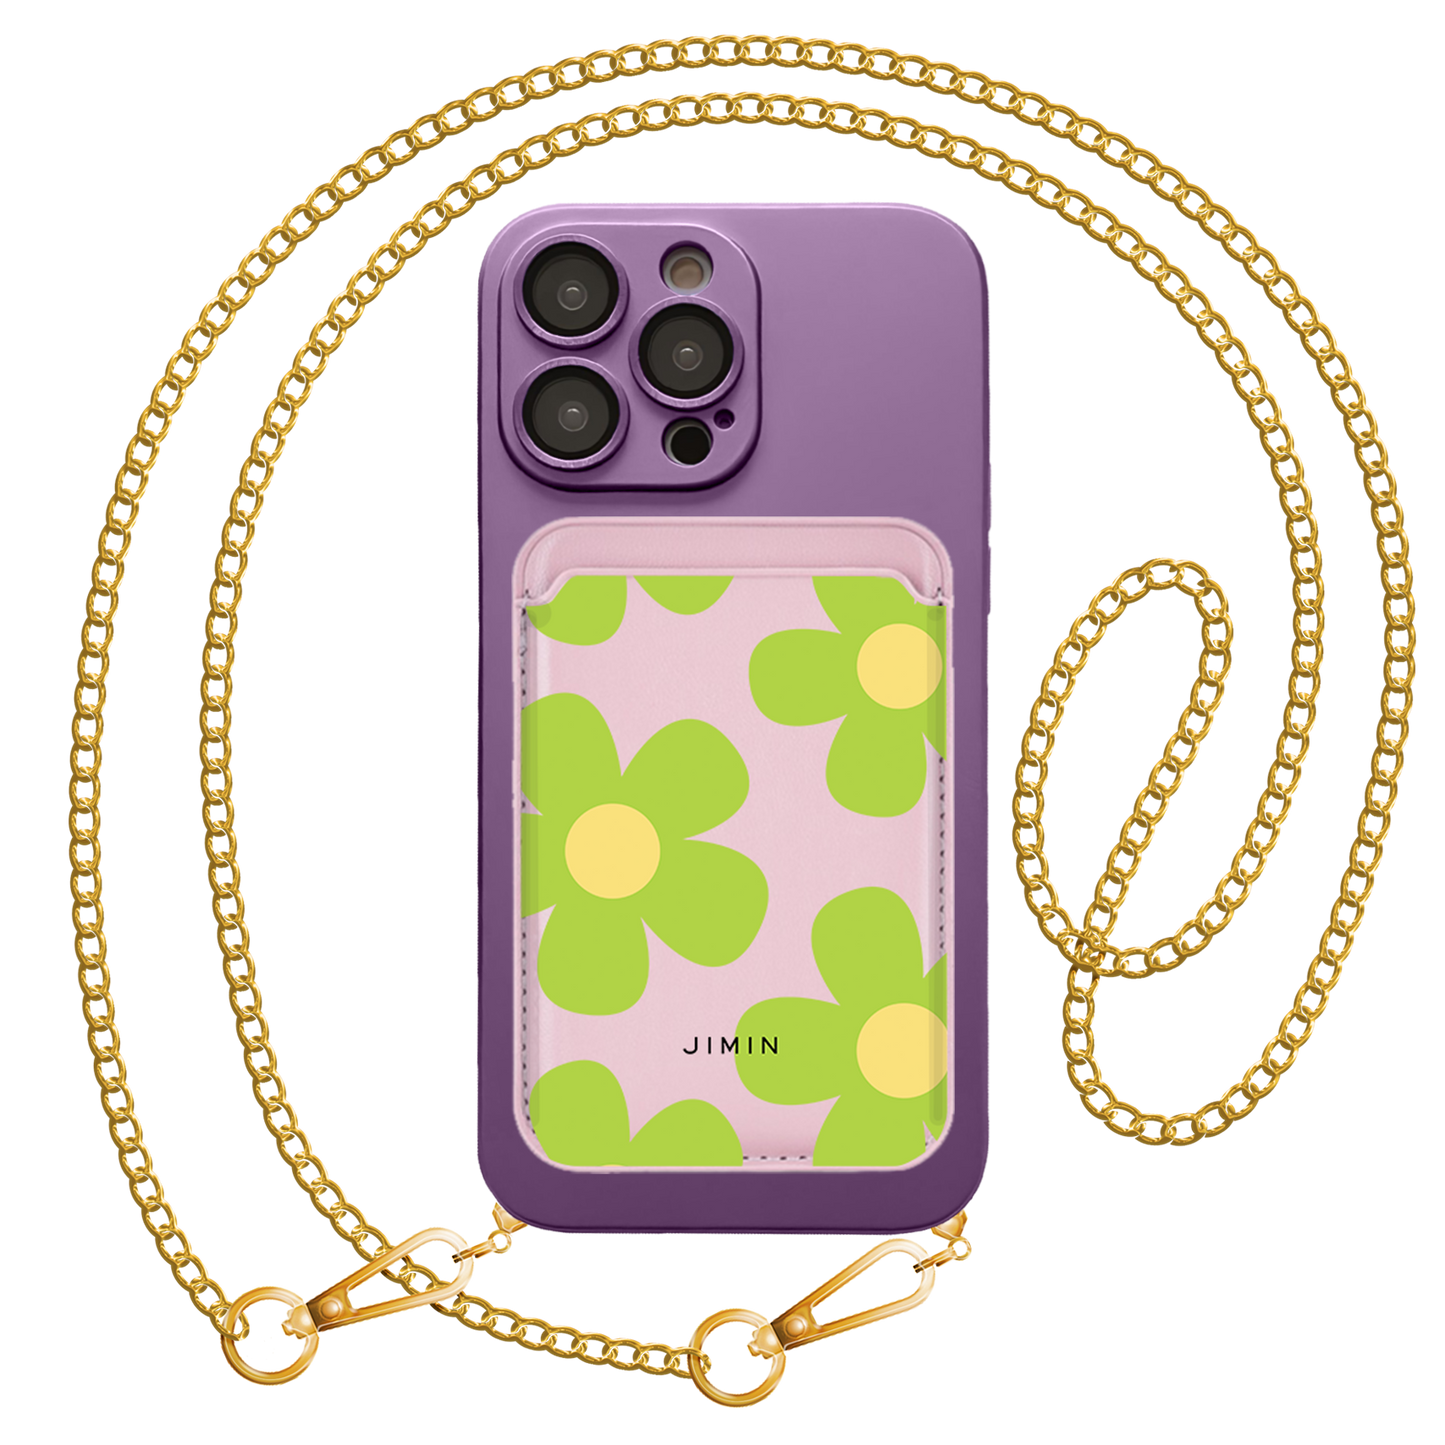 iPhone Magnetic Wallet Silicone Case - Daisy Bloom